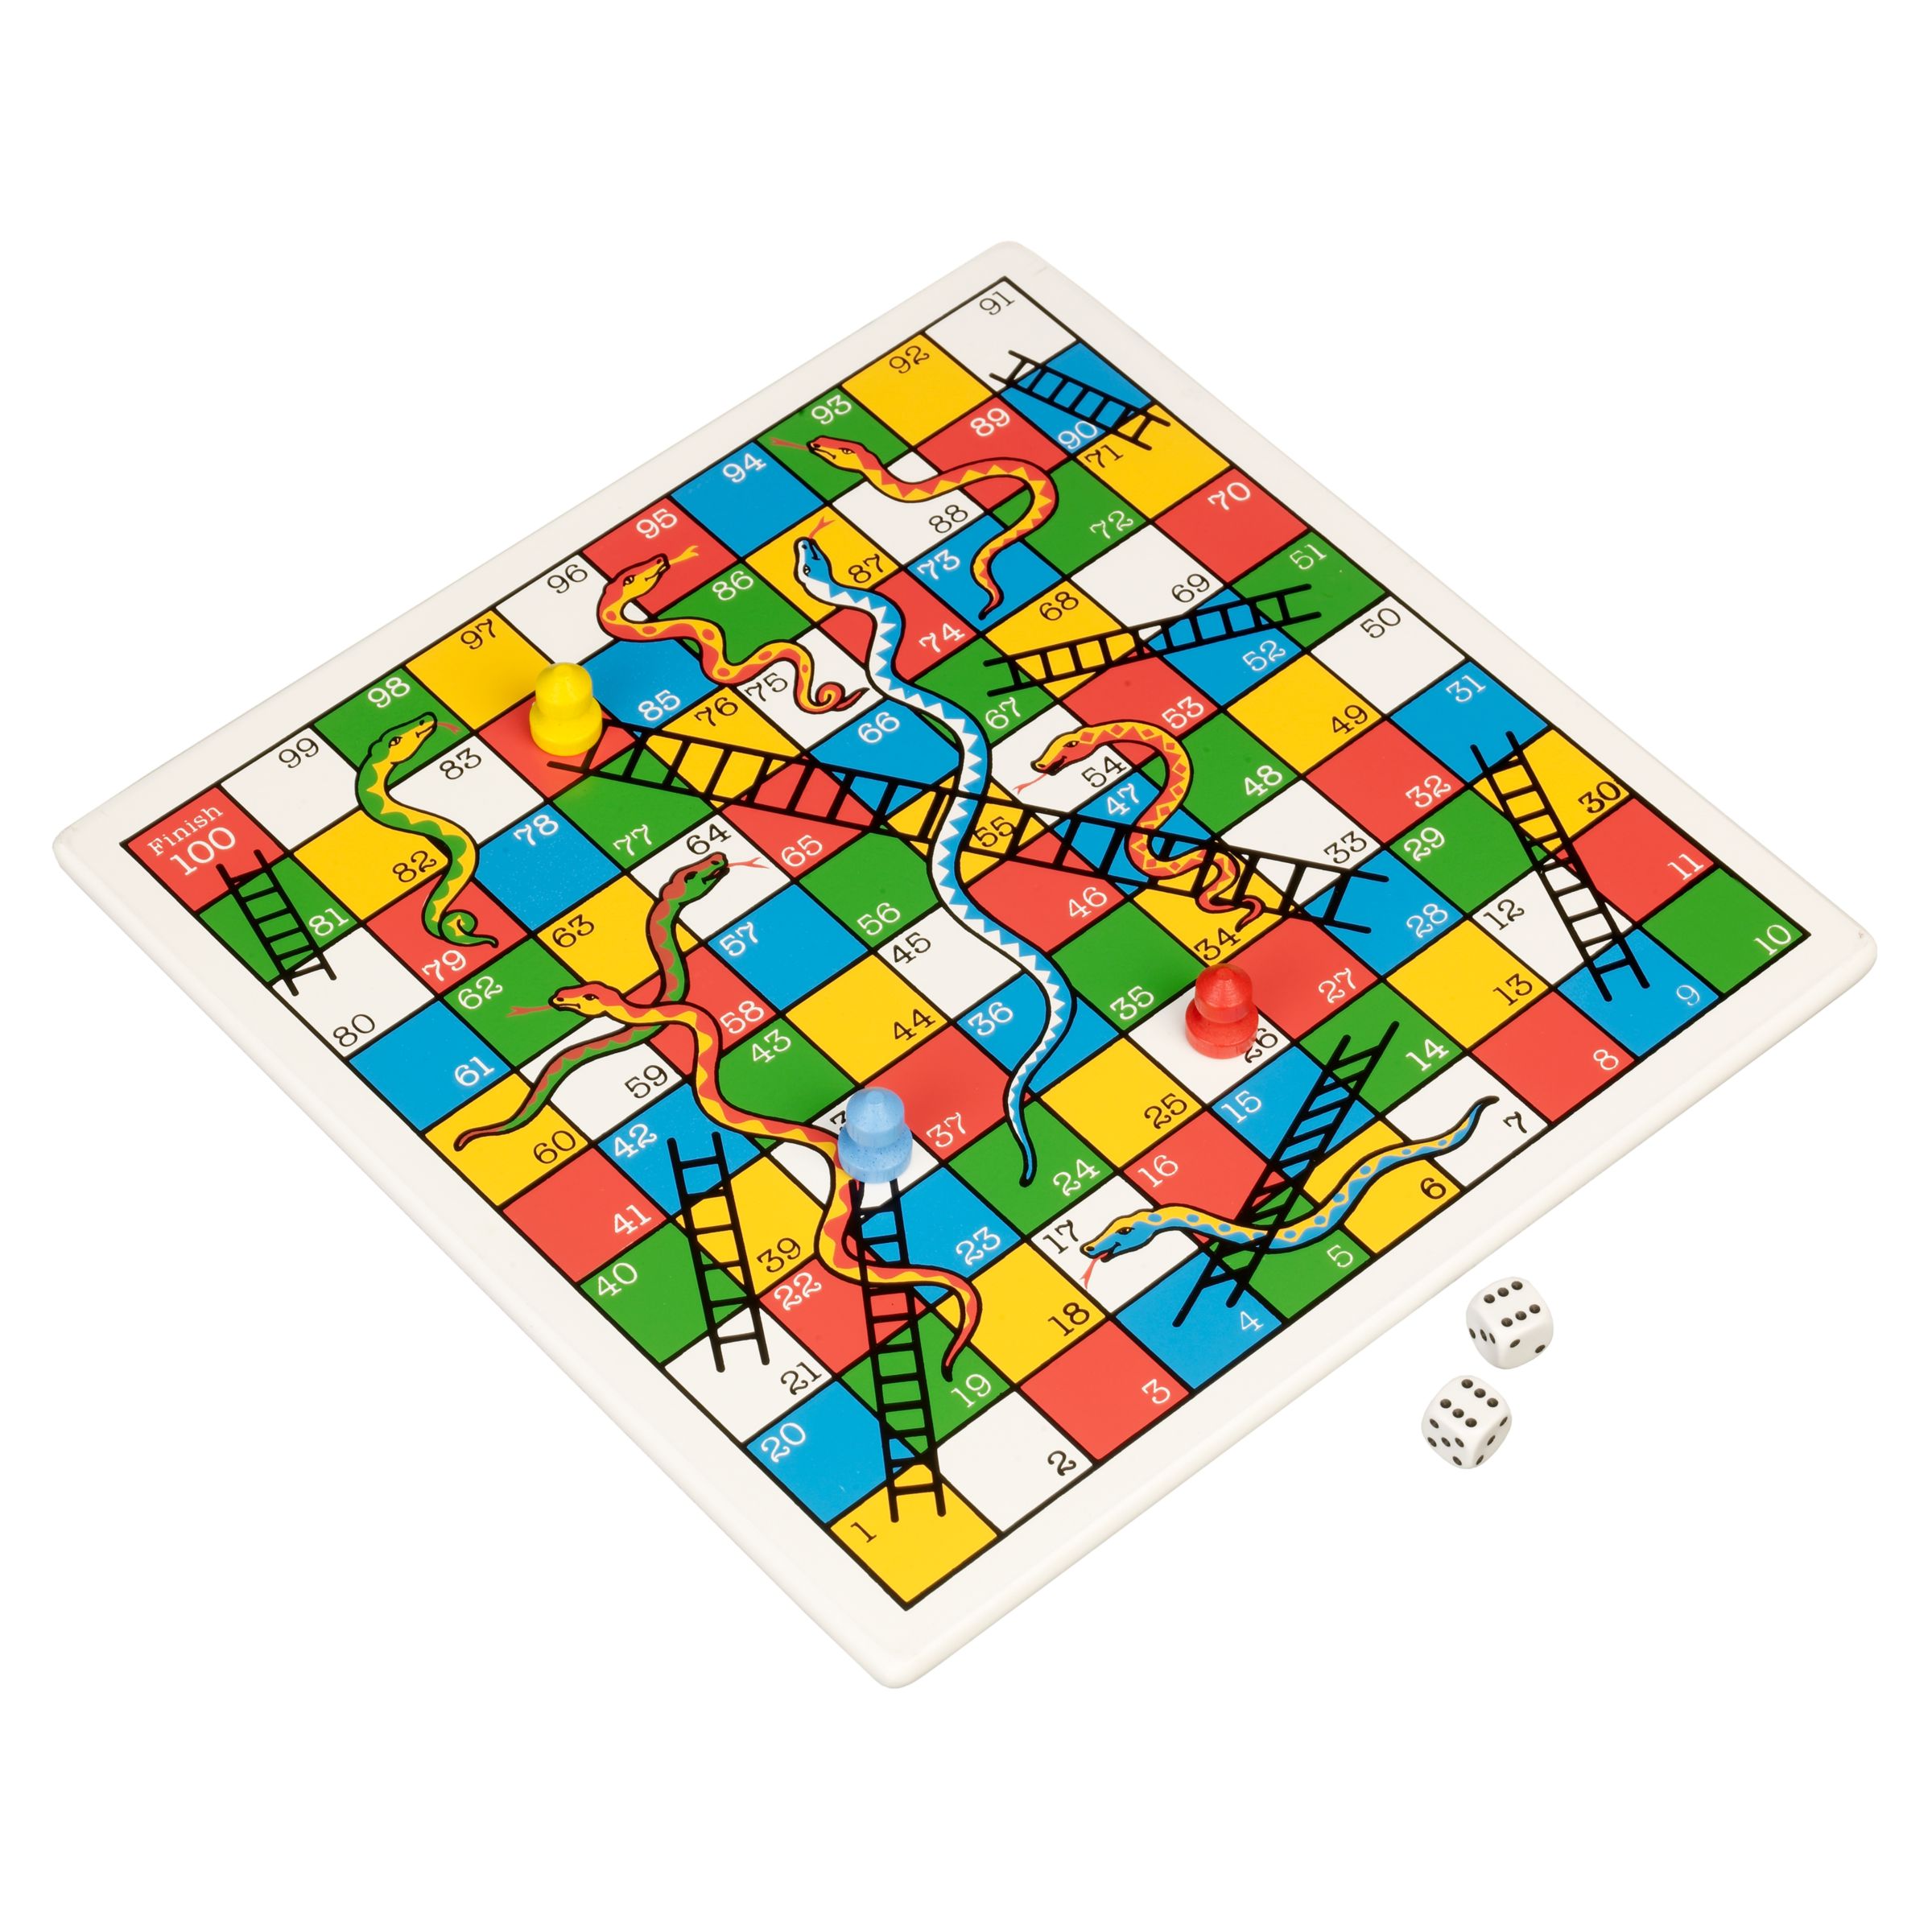 Snakes and Ladders / Ludo